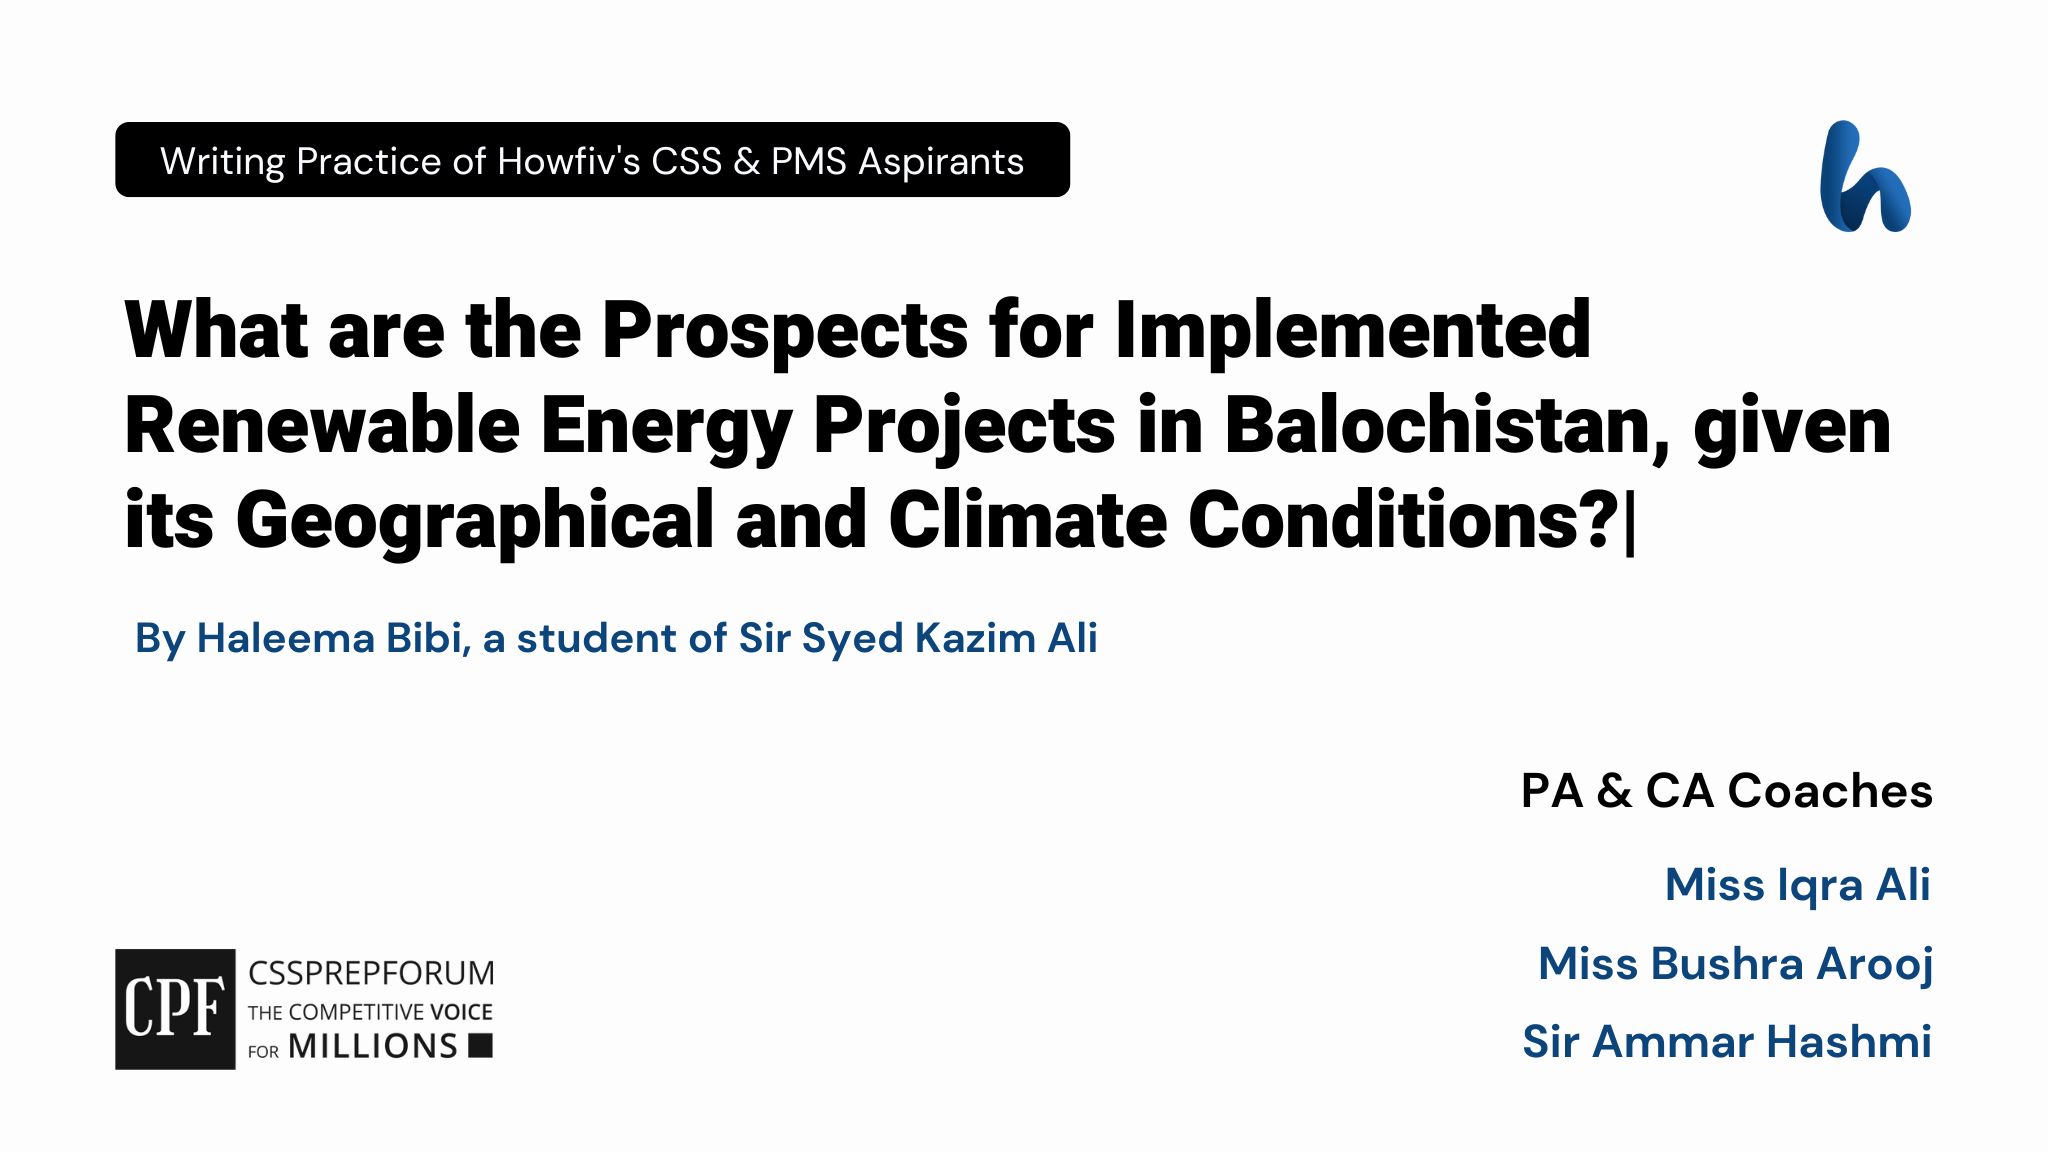 CSS Current Affairs article | Prospects for Implemented Renewable Energy Projects in Balochistan | is written by Haleema Bibi under the supervision of Sir Ammar Hashmi...